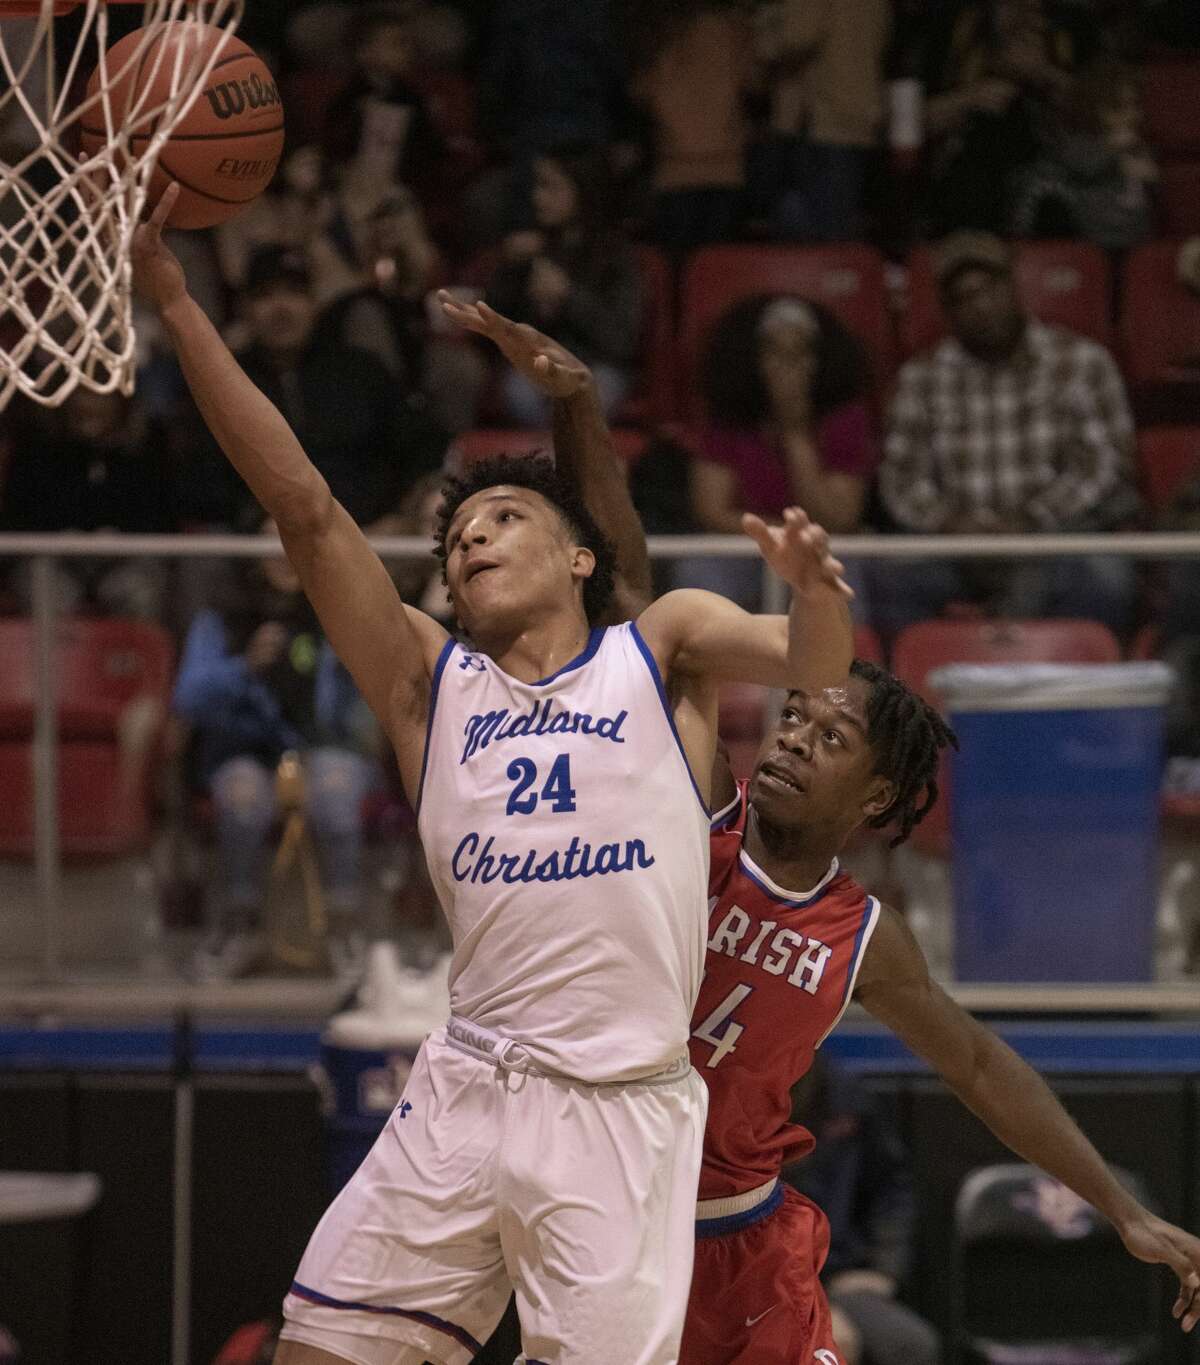 Midland Christian's Joseph Venzant goes in for a layup as Dallas Parish's Vinnie Gaddis tries to defend 02/18/2020 in the TAPPS 6A playoff at the McGraw Event Center. Tim Fischer/Reporter-Telegram